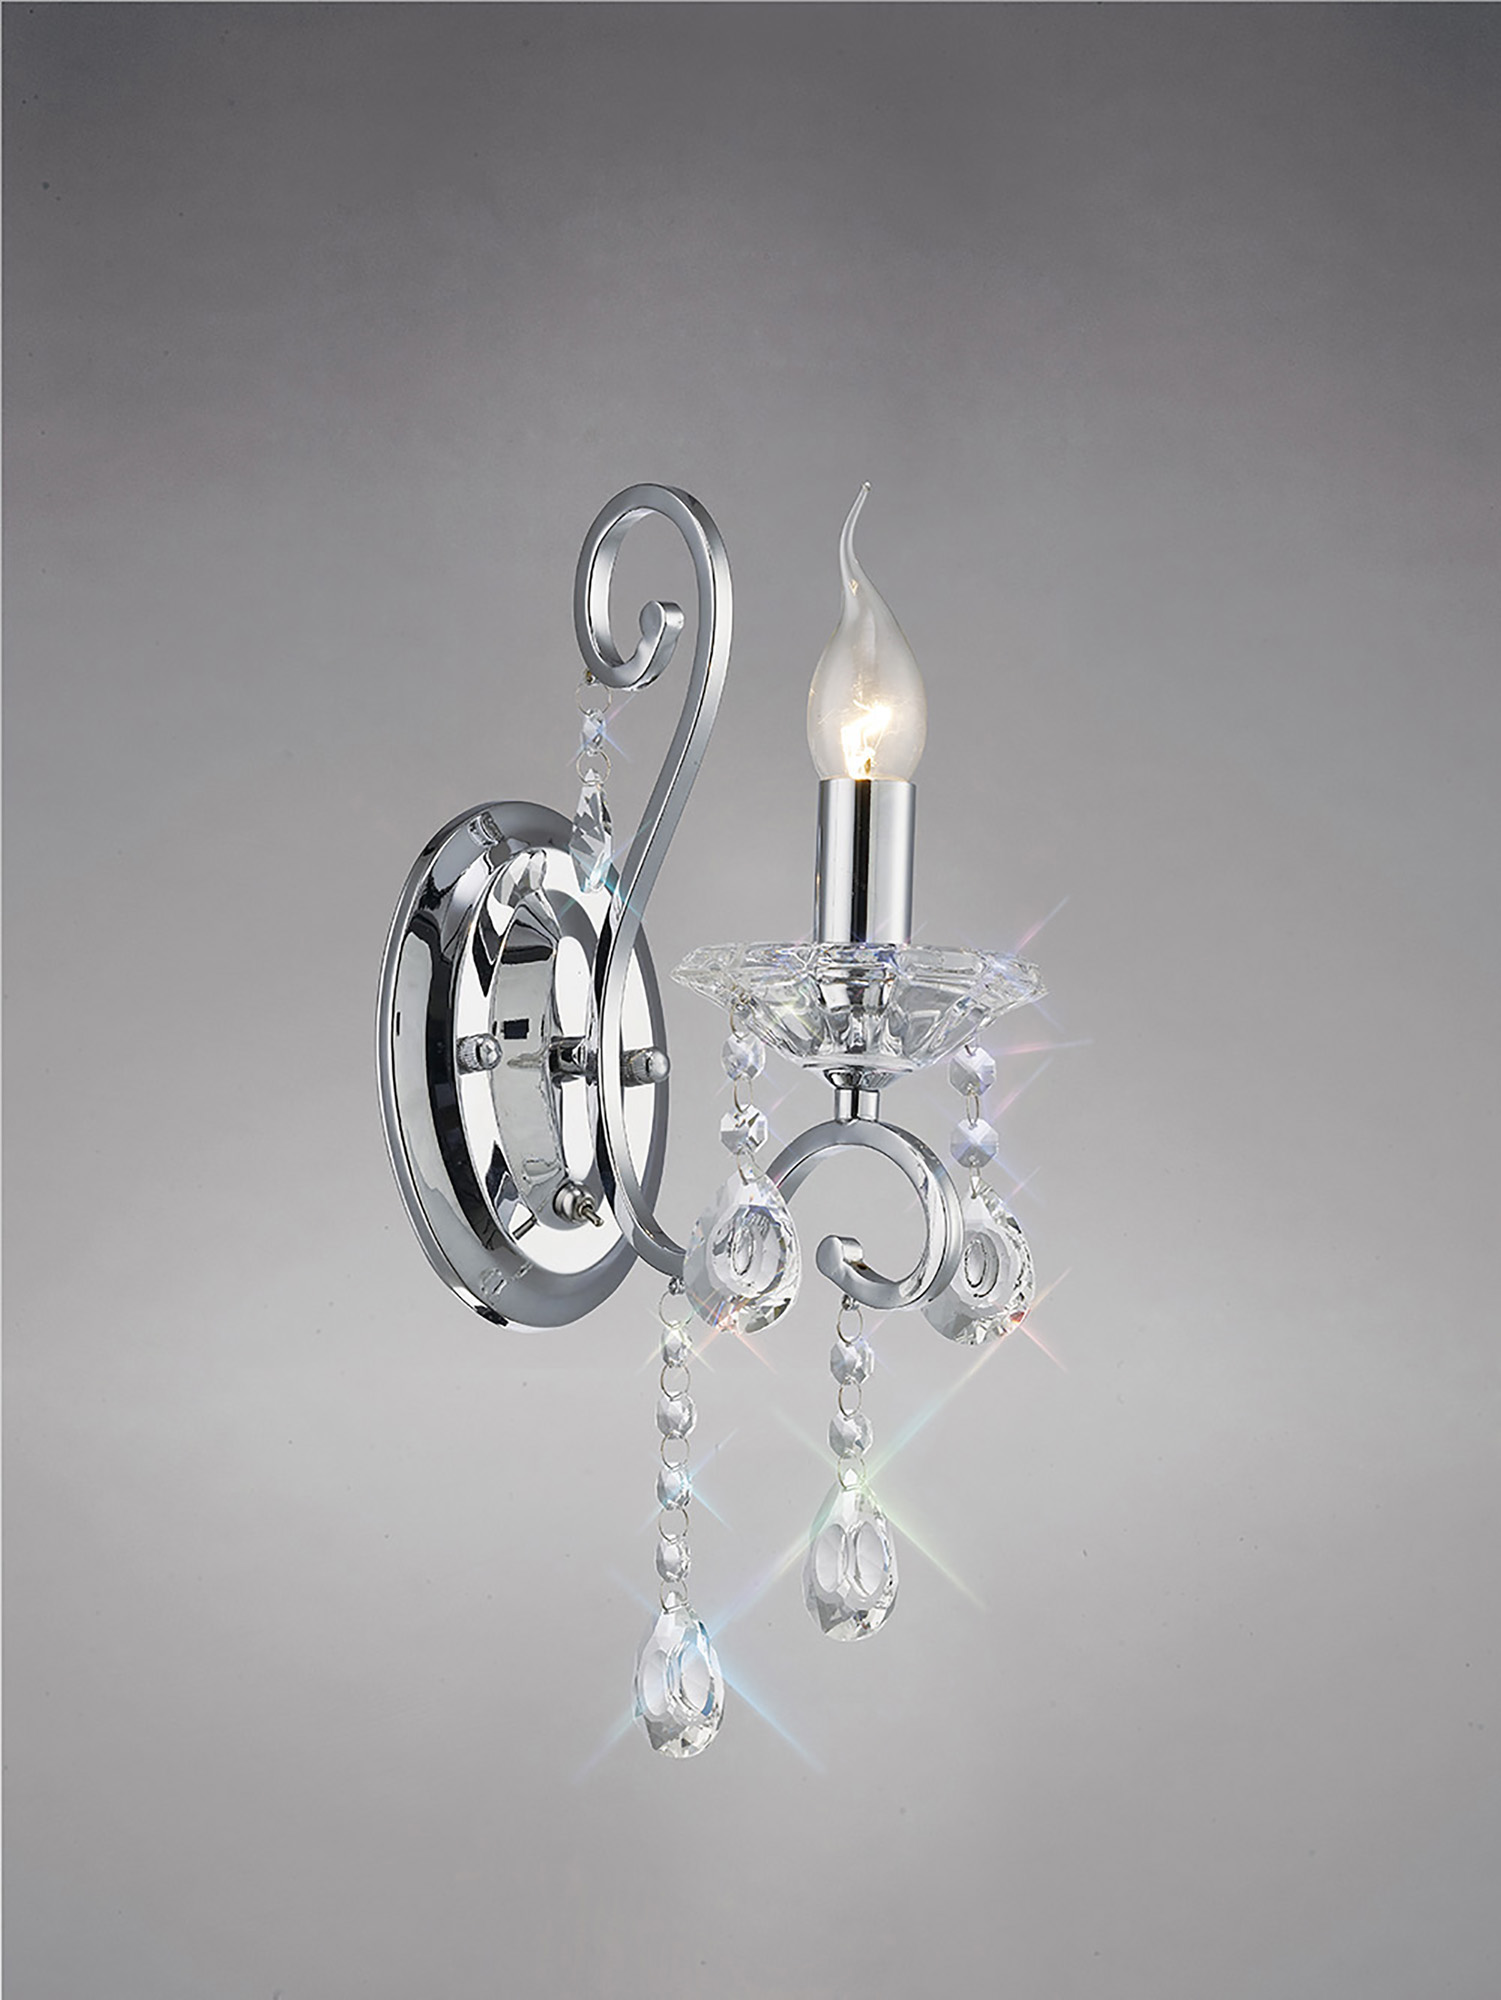 IL31361  Vela Crystal Switched Wall Lamp 1 Light Polished Chrome